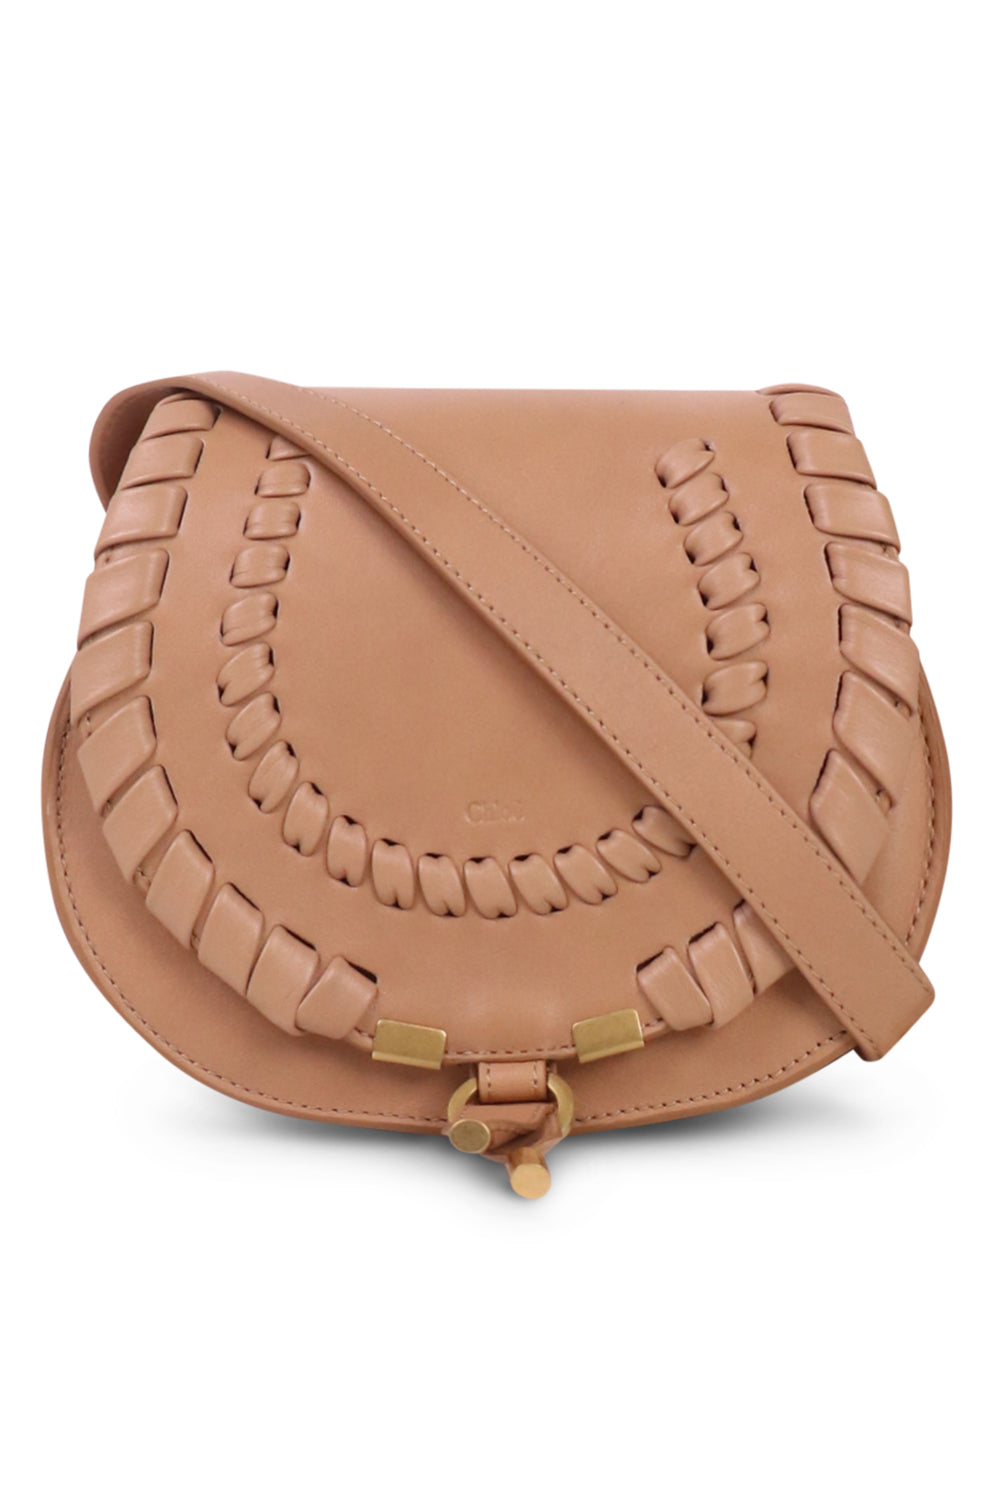 CHLOE Unclassified BROWN MARCIE SMALL BAG | LIGHT TAN WITH TONAL WHIP STITCHING